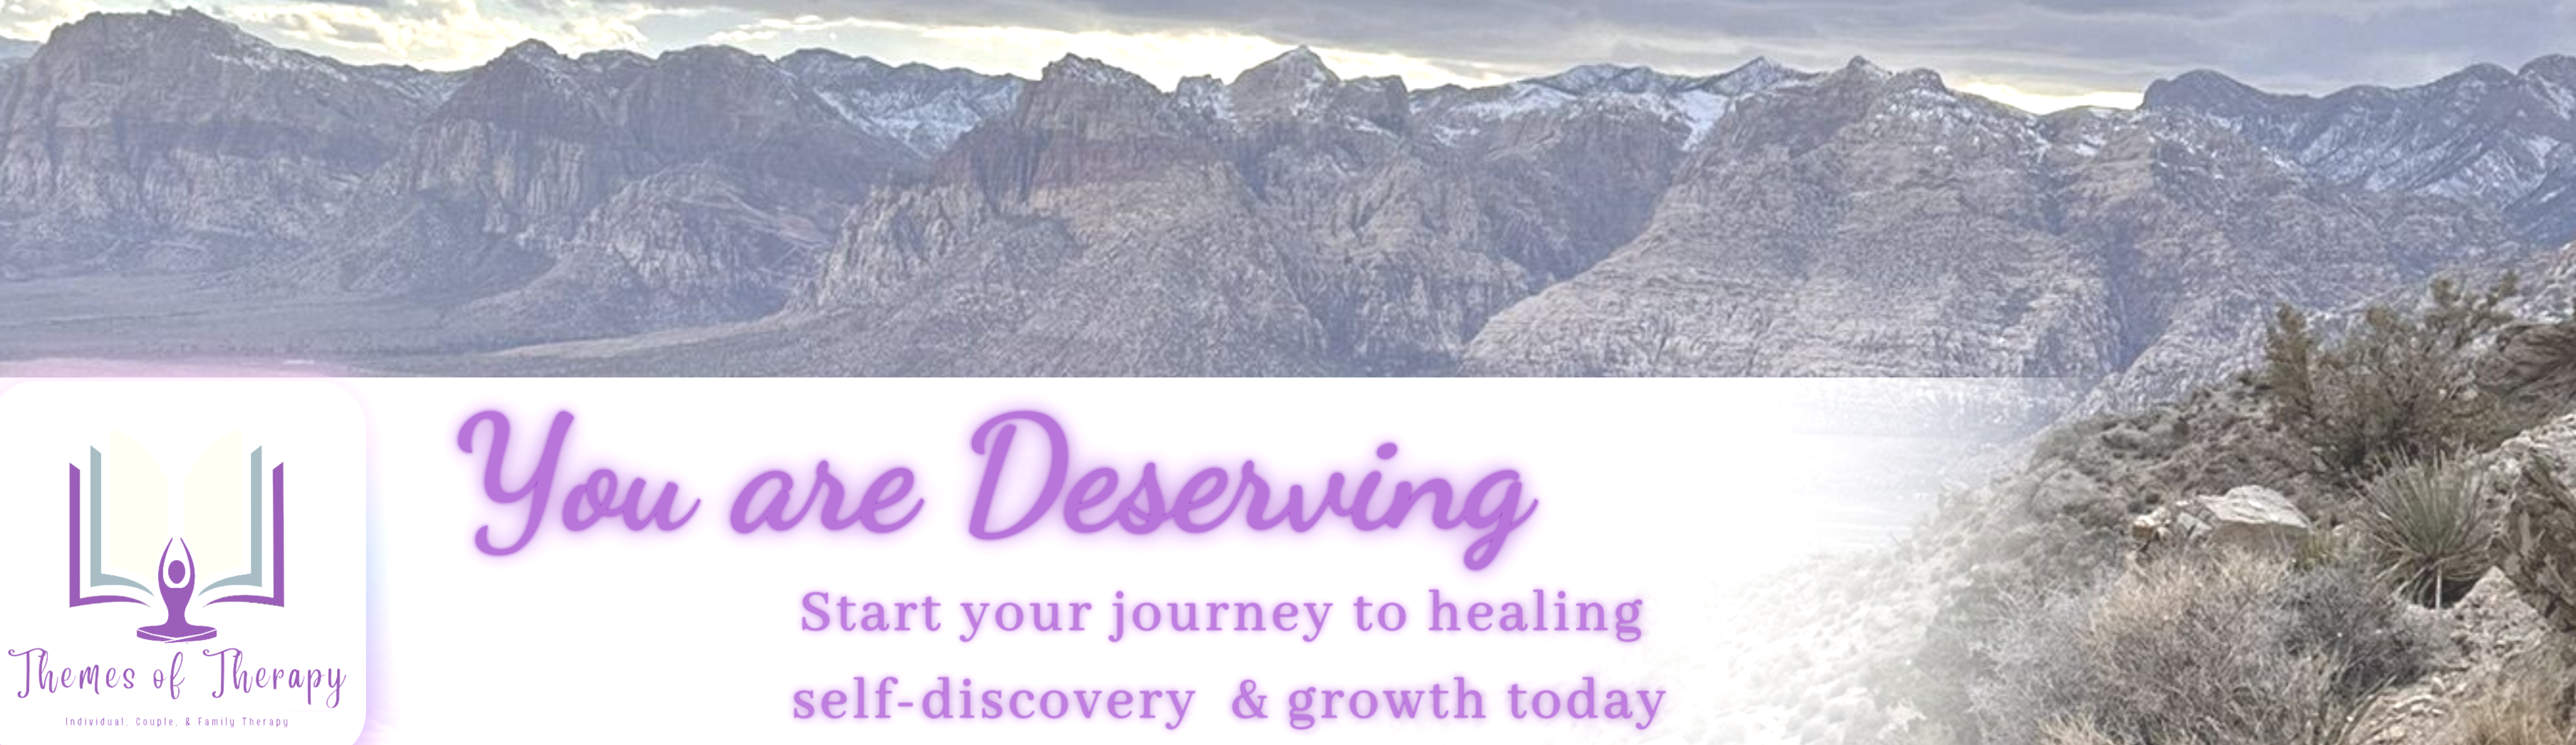 Themes of Therapy Services. You are Deserving. Start your journey to healing and growth today.